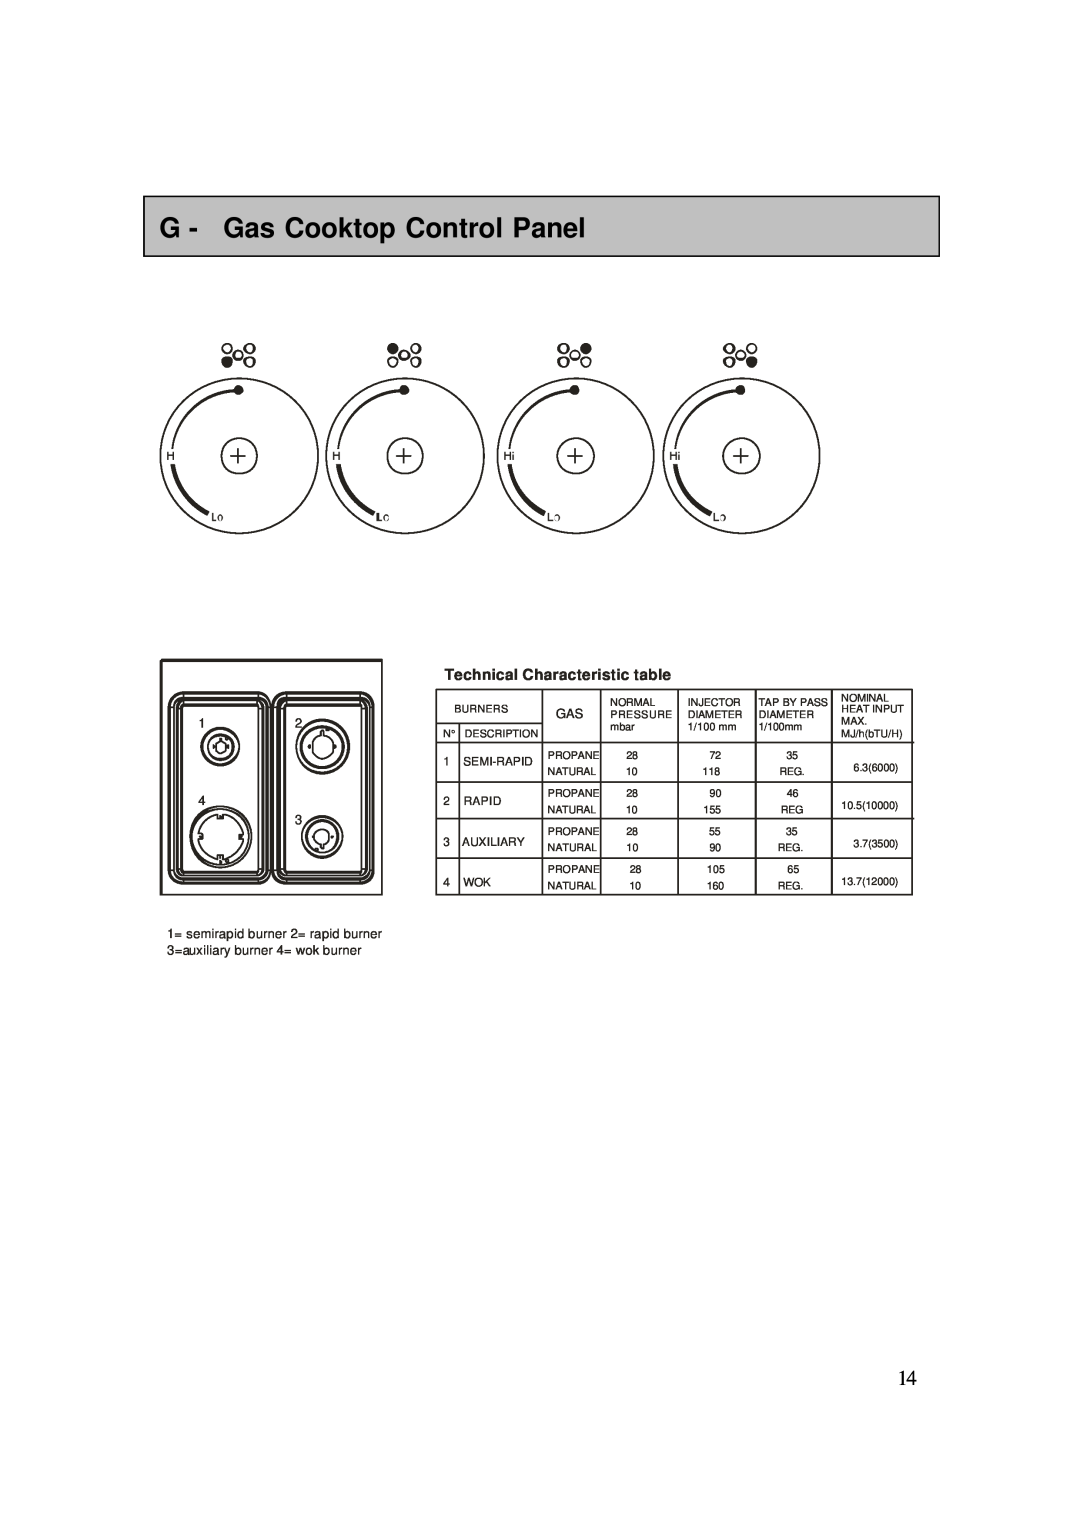 AEG 4006G-M user manual G - Gas Cooktop Control Panel, Technical Characteristic table, Semi-Rapid, Auxiliary 